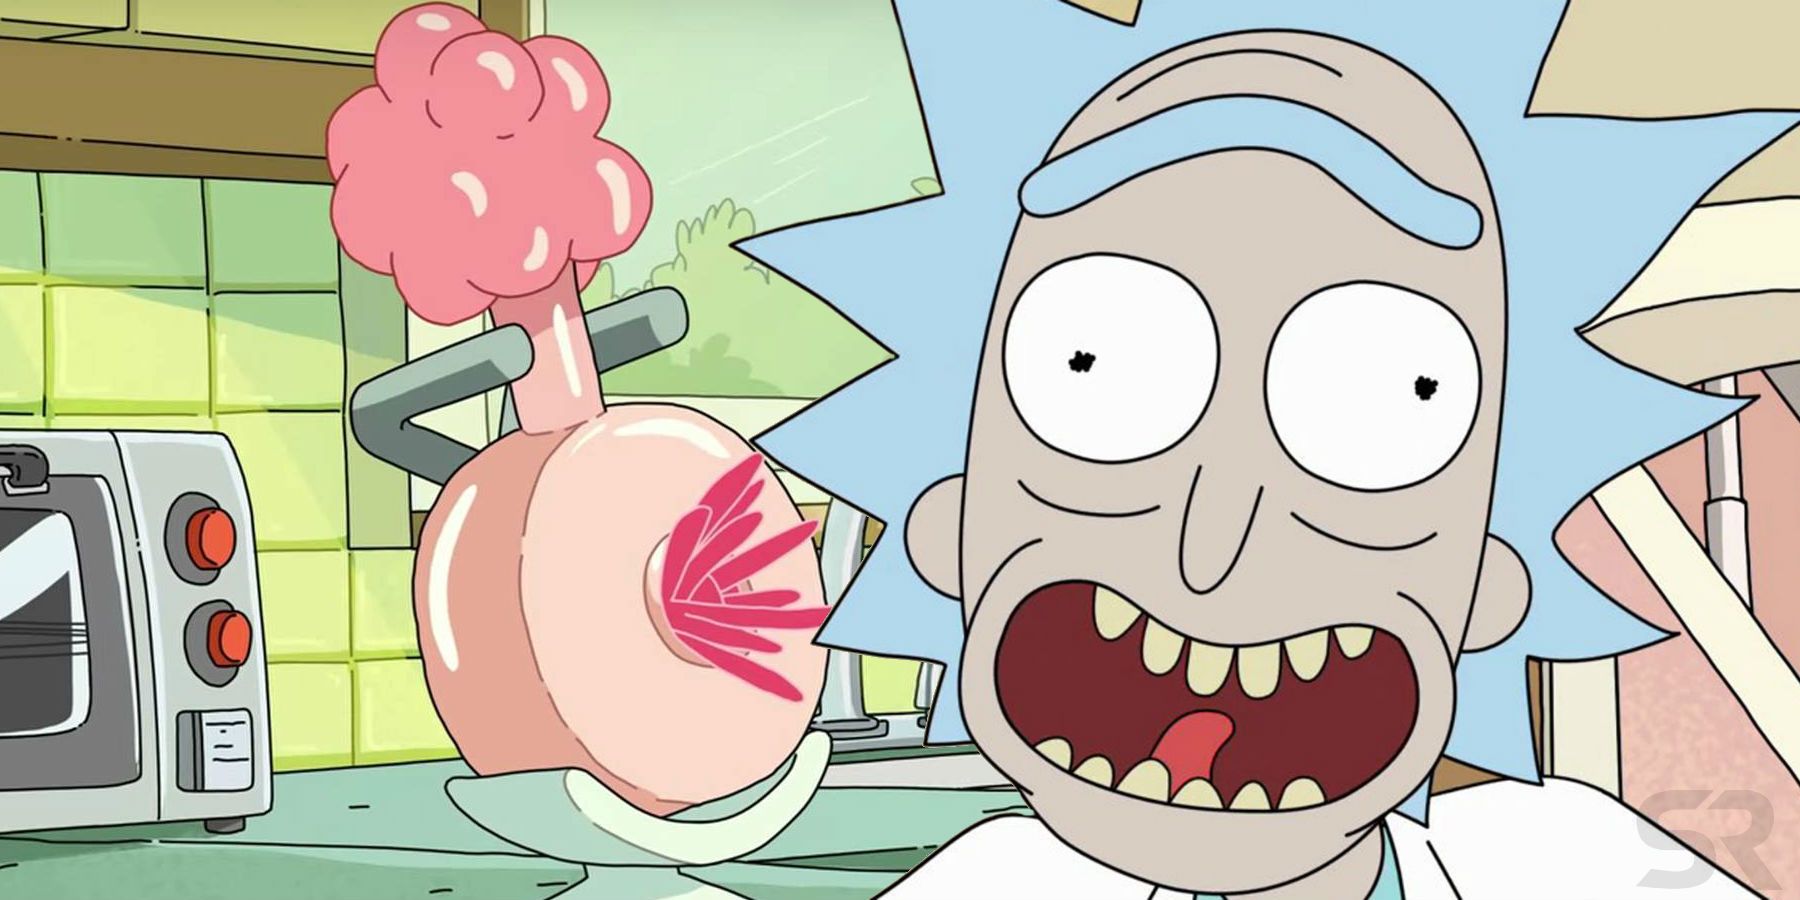 Rick And Morty Plumbus free delivery and returns.